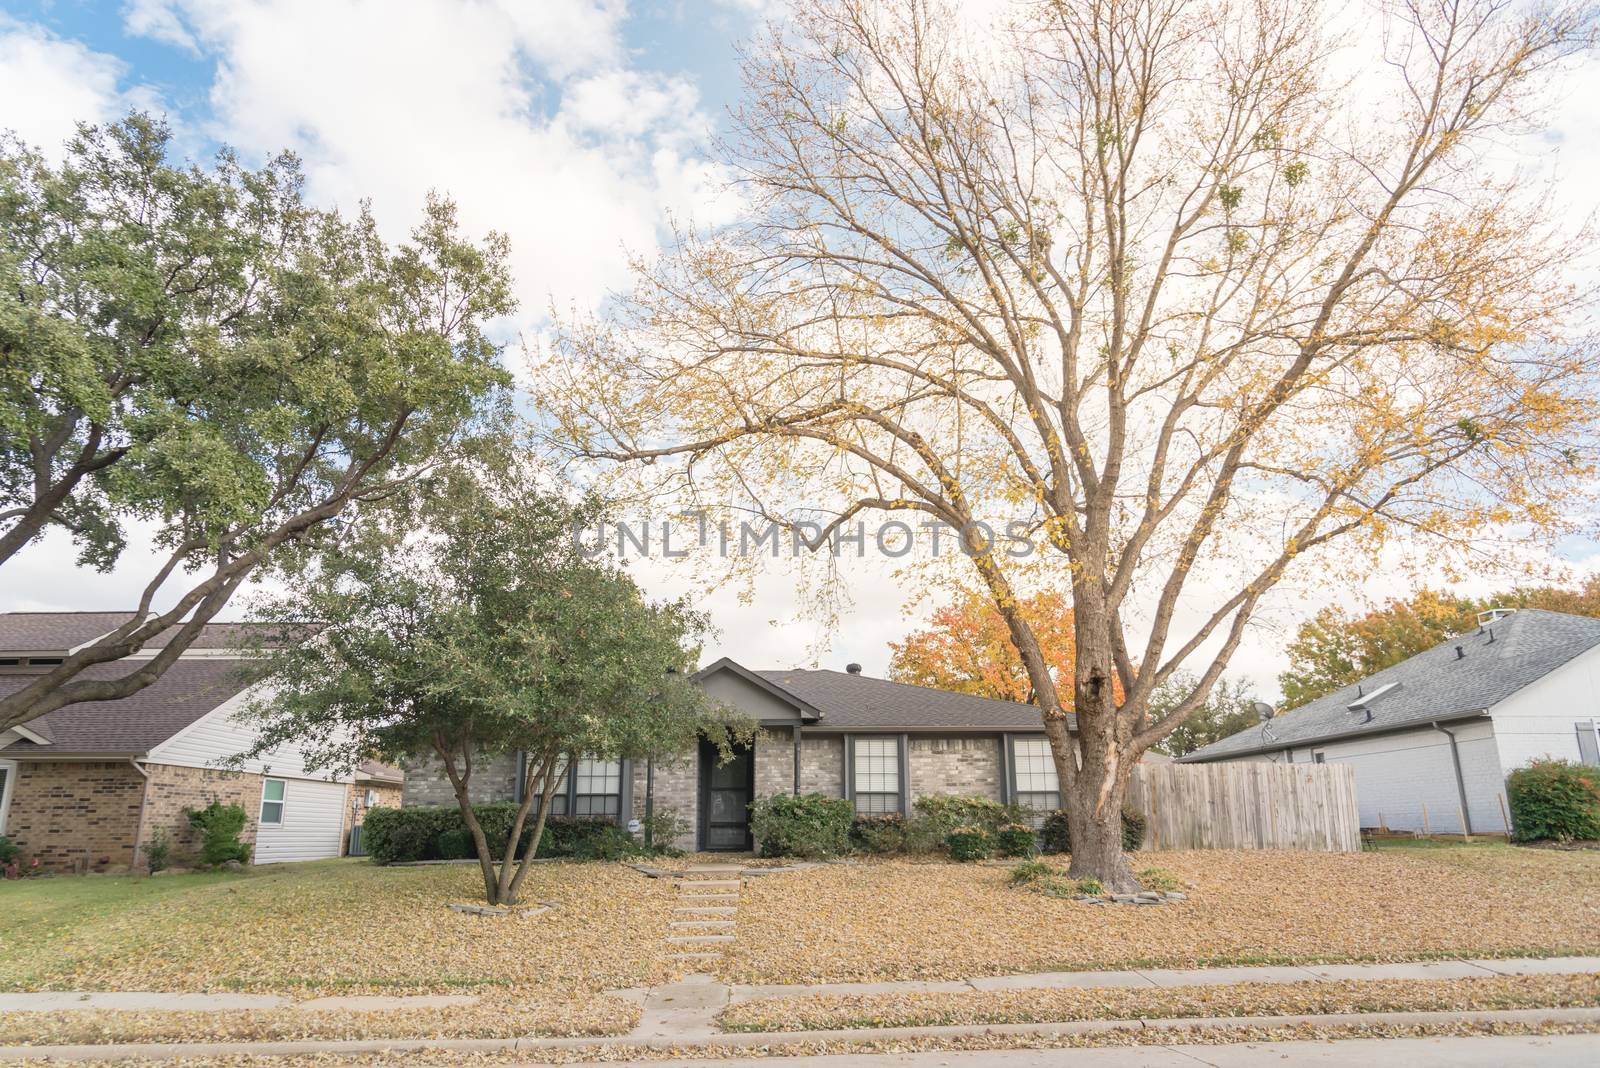 Beautiful front yard of typical single family houses near Dallas in fall season colorful leaves by trongnguyen